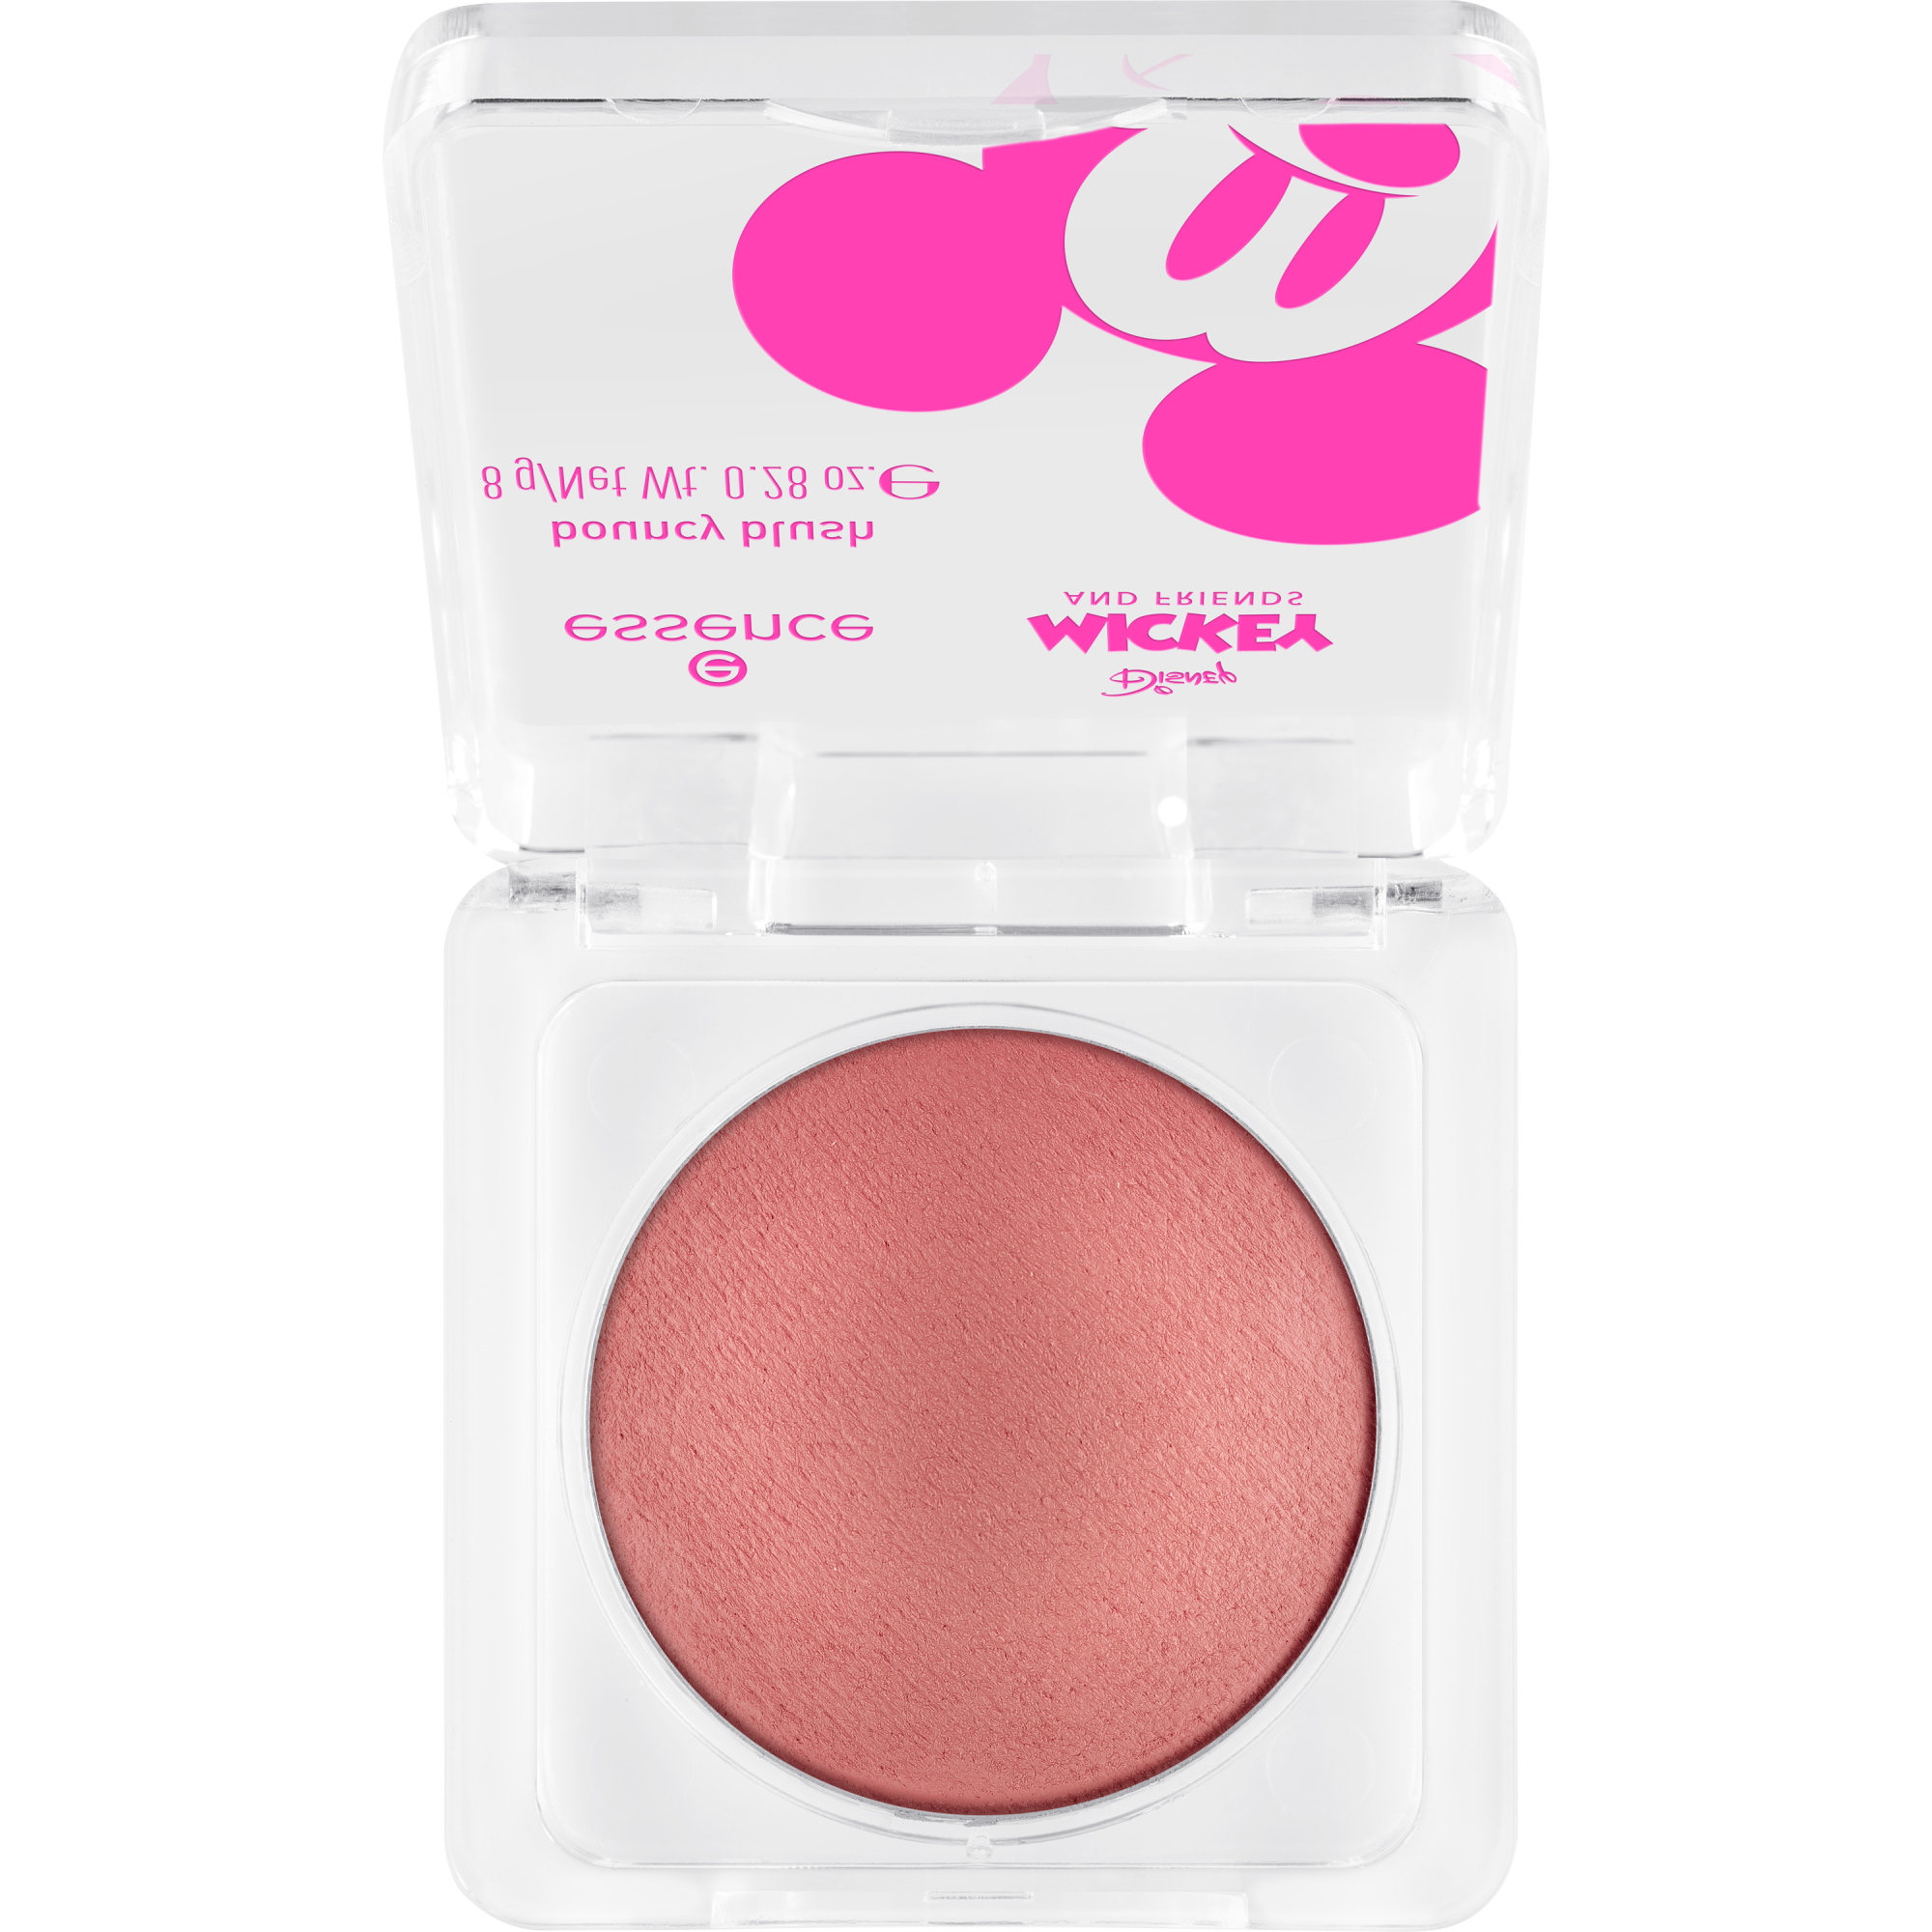 Disney Mickey and Friends bouncy blush